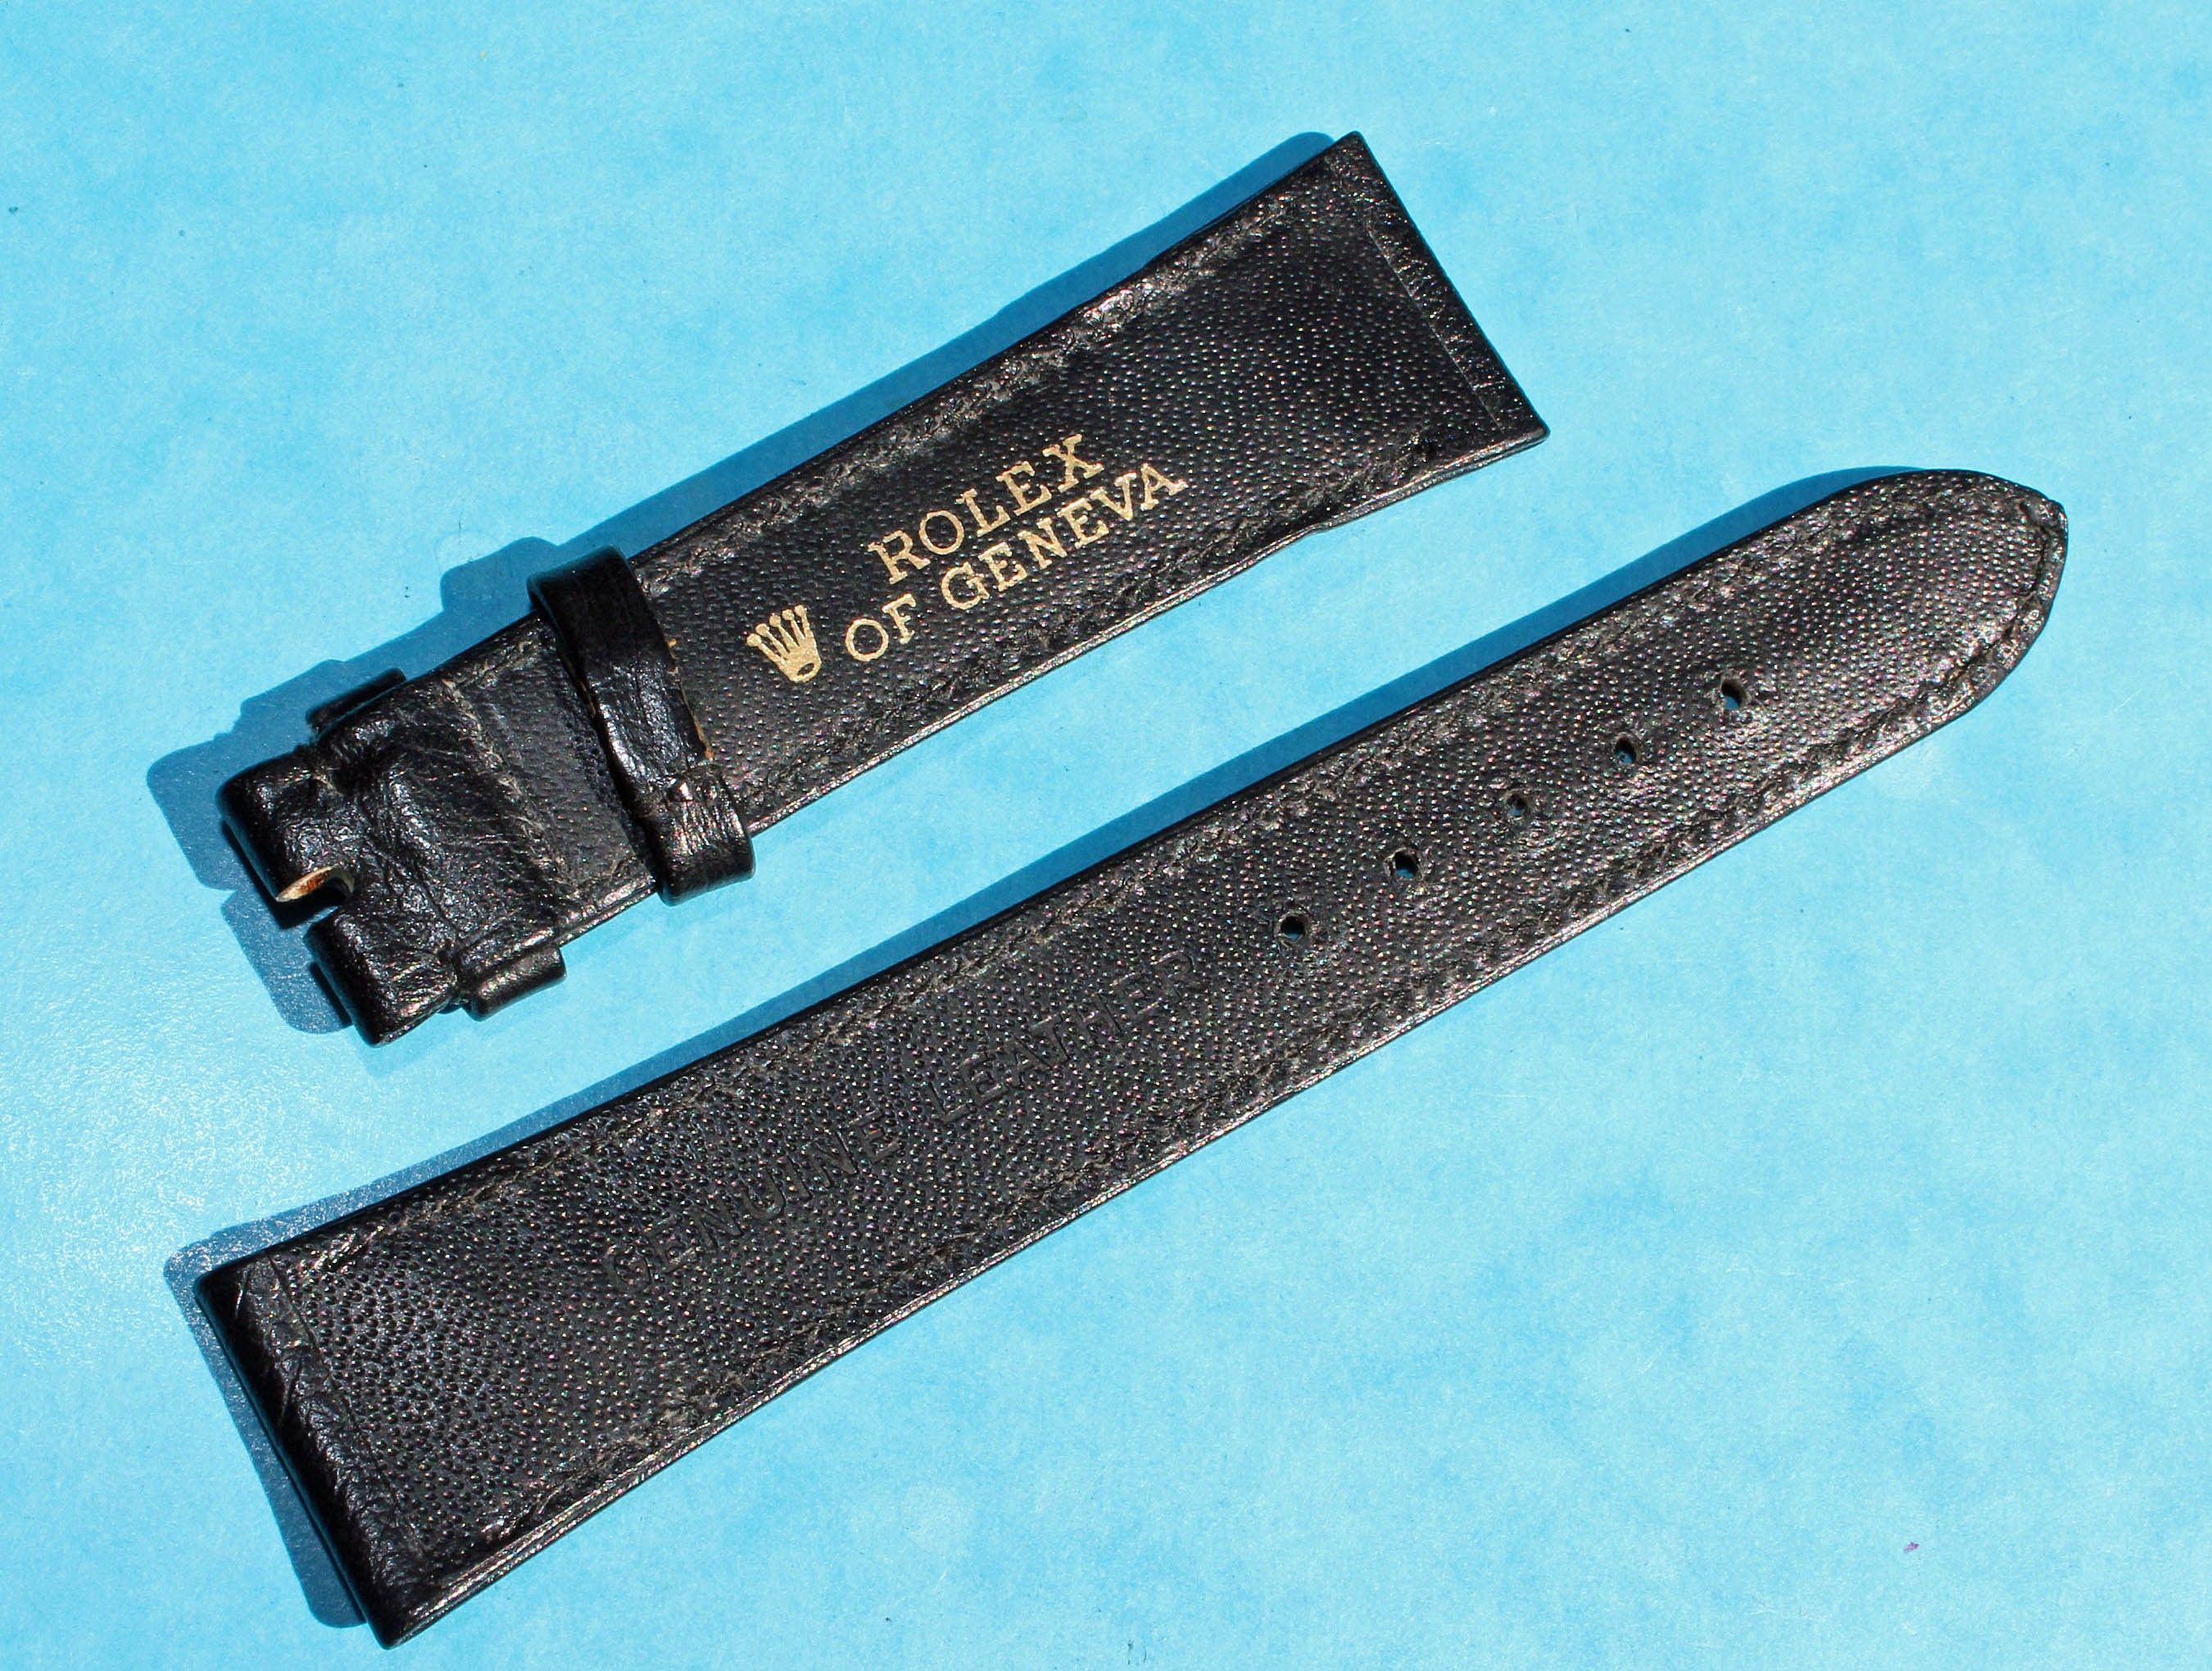 Mm rolex leather watch band